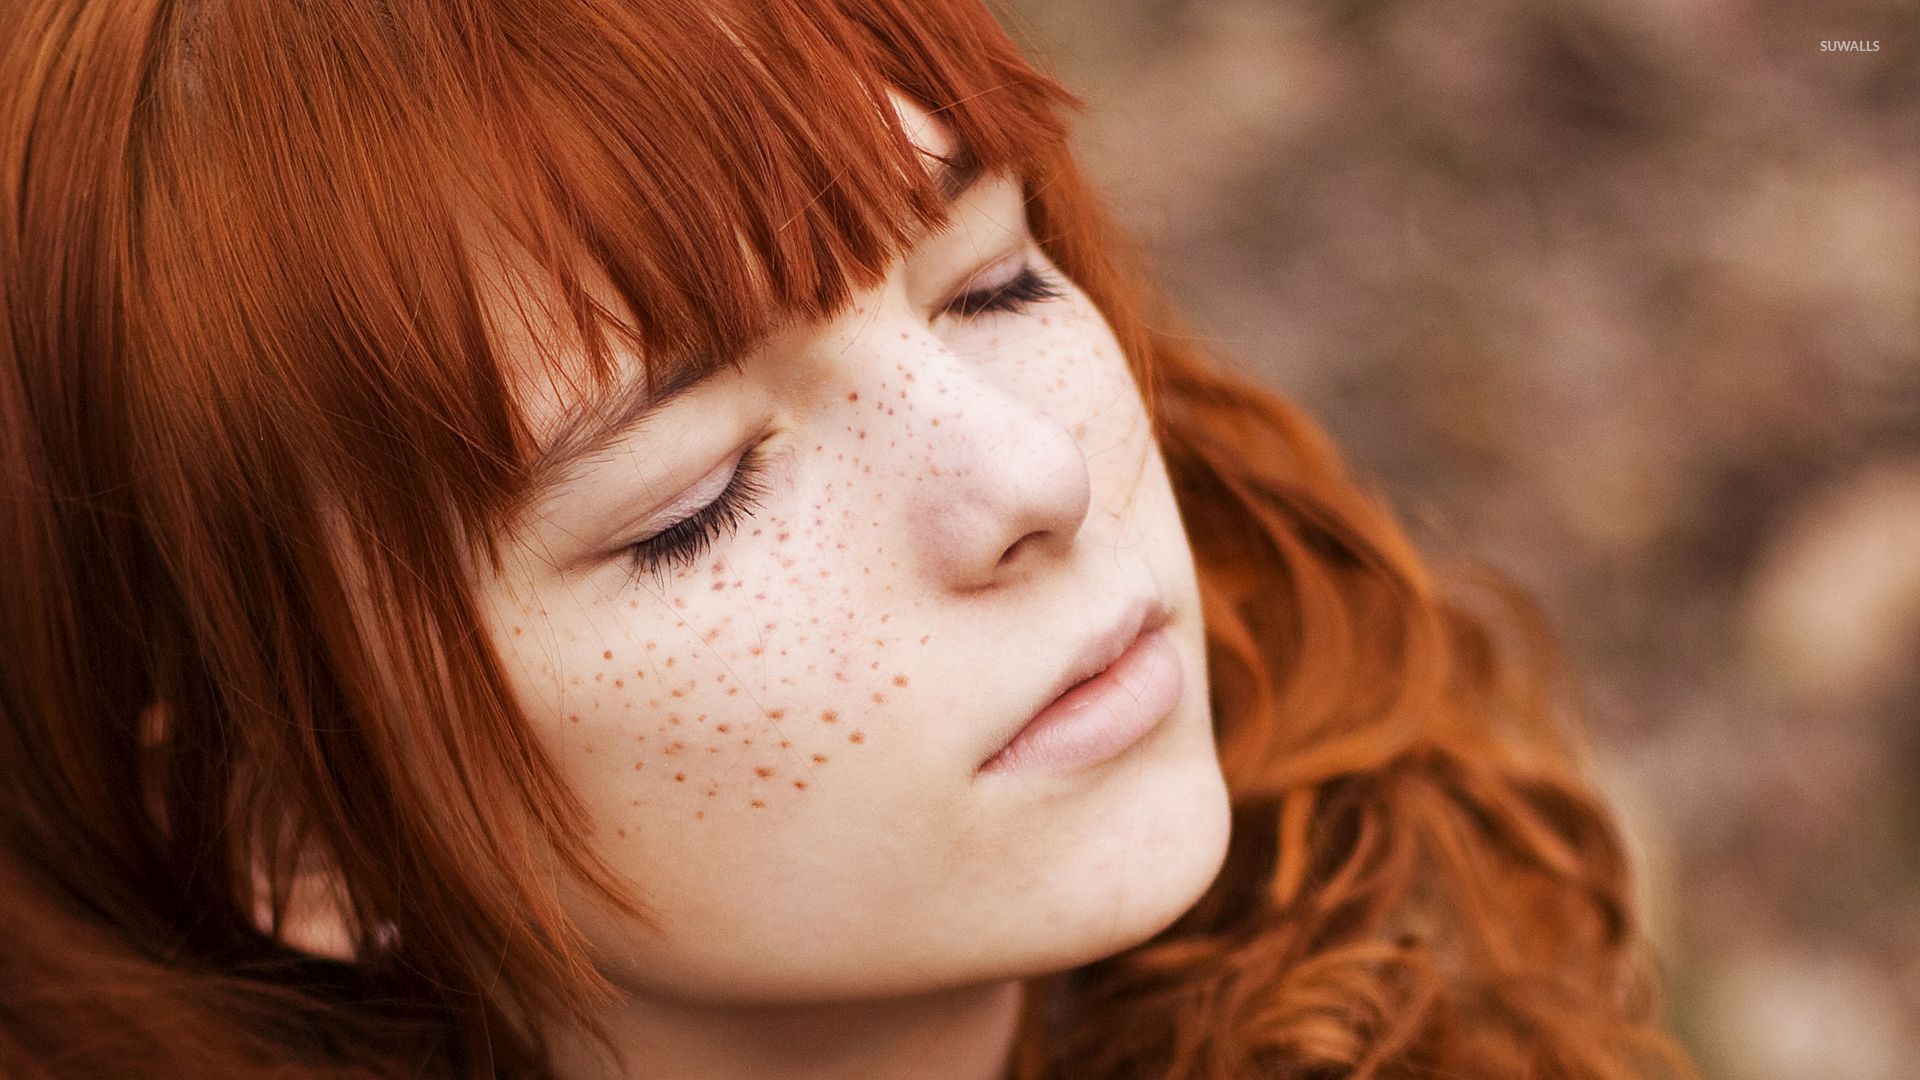 Cute Redhead With Closed Eyes Wallpaper Girl Wallpapers 54487